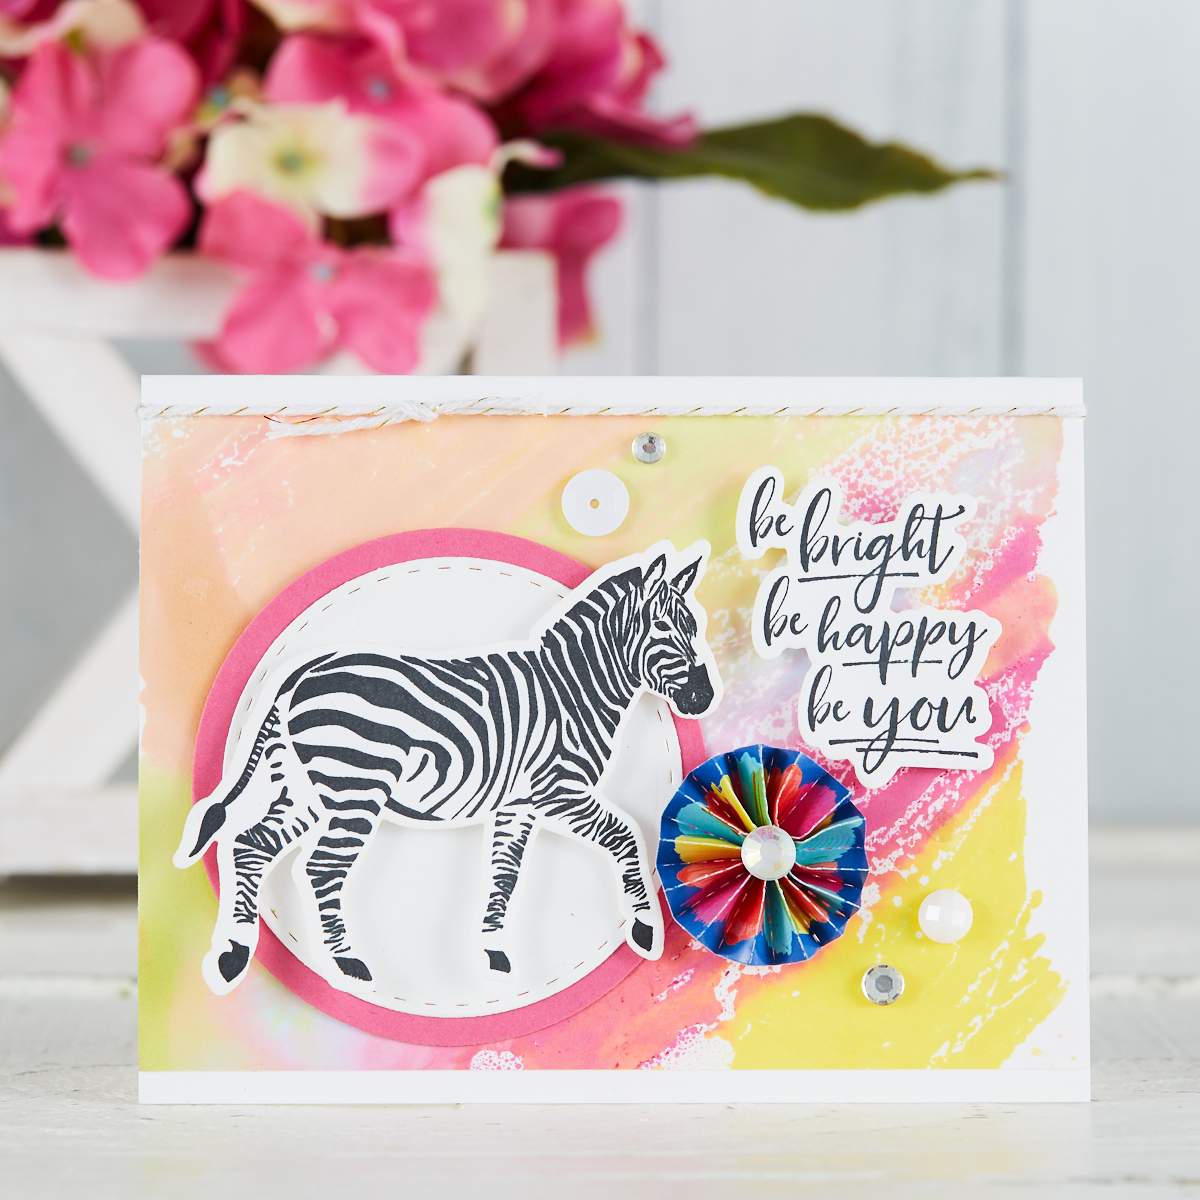 handmade card by Mariana Grigsby with zebra stamp from Escape the Ordinary Stamp Set from Fun Stampers Journey, with Gel Press watercolor background in pink, peach and yellow #funstampersjourney #cardmaking